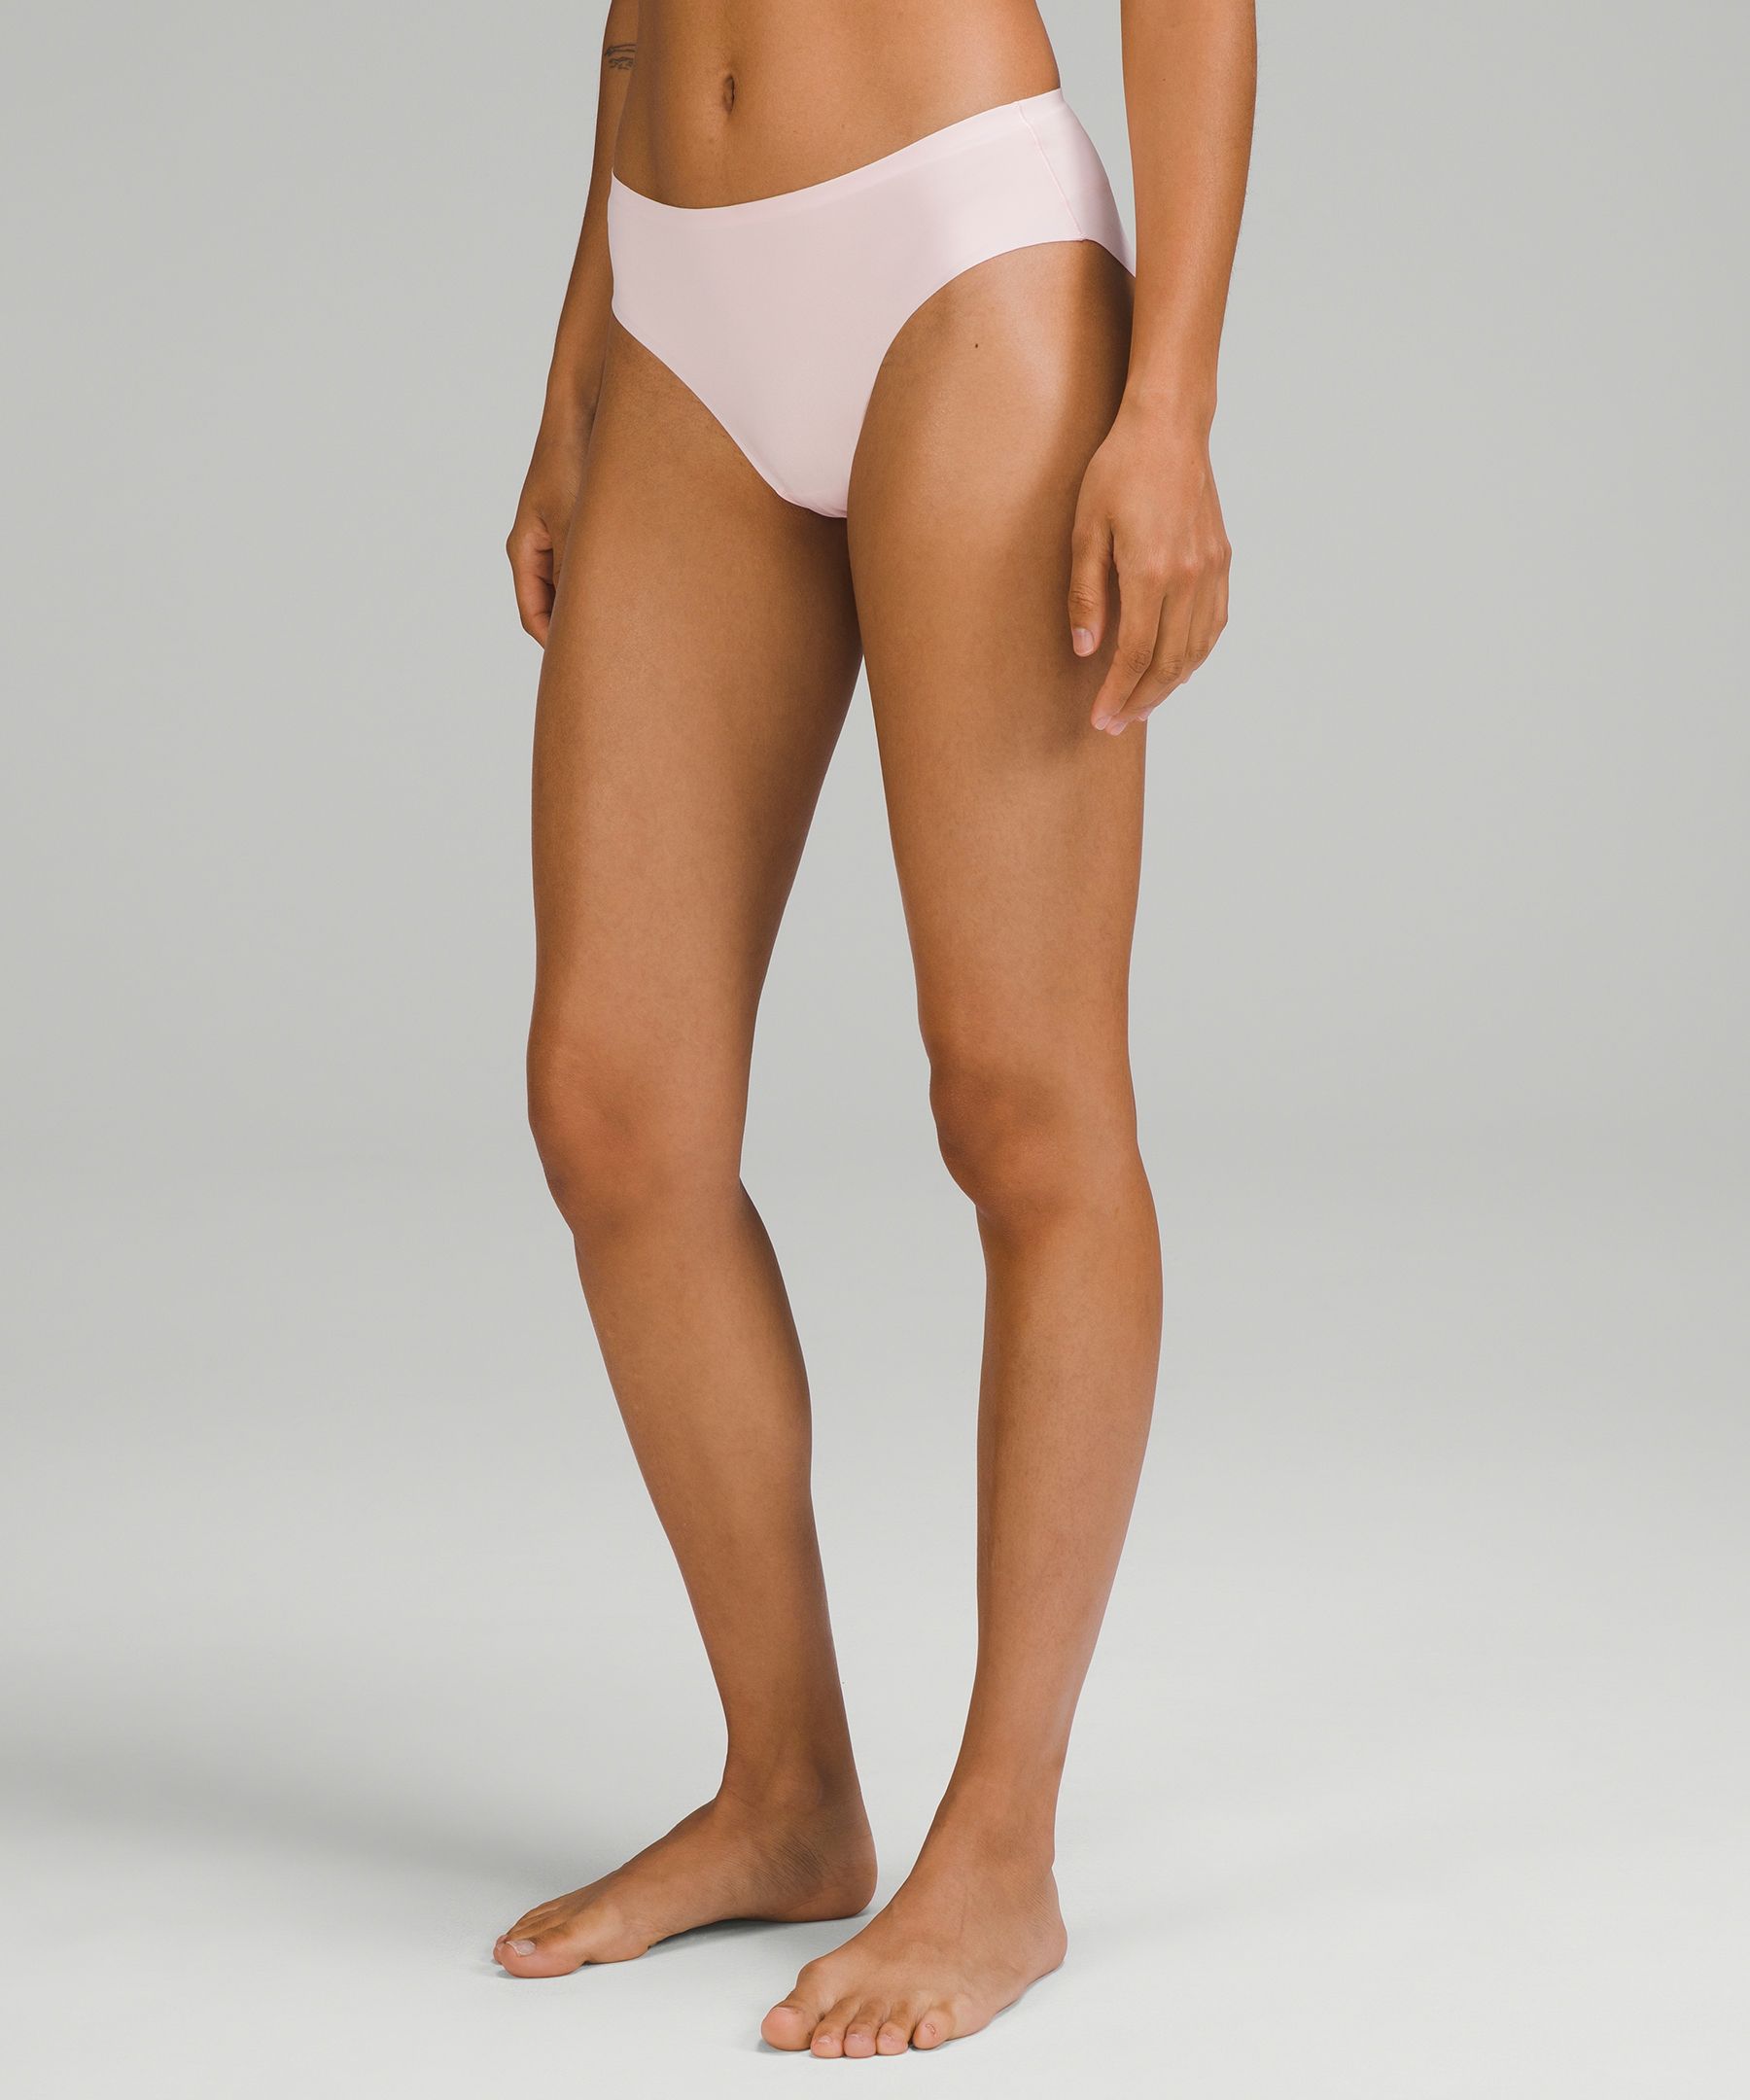  tichers Comfortable Women's Briefs, Seamless and